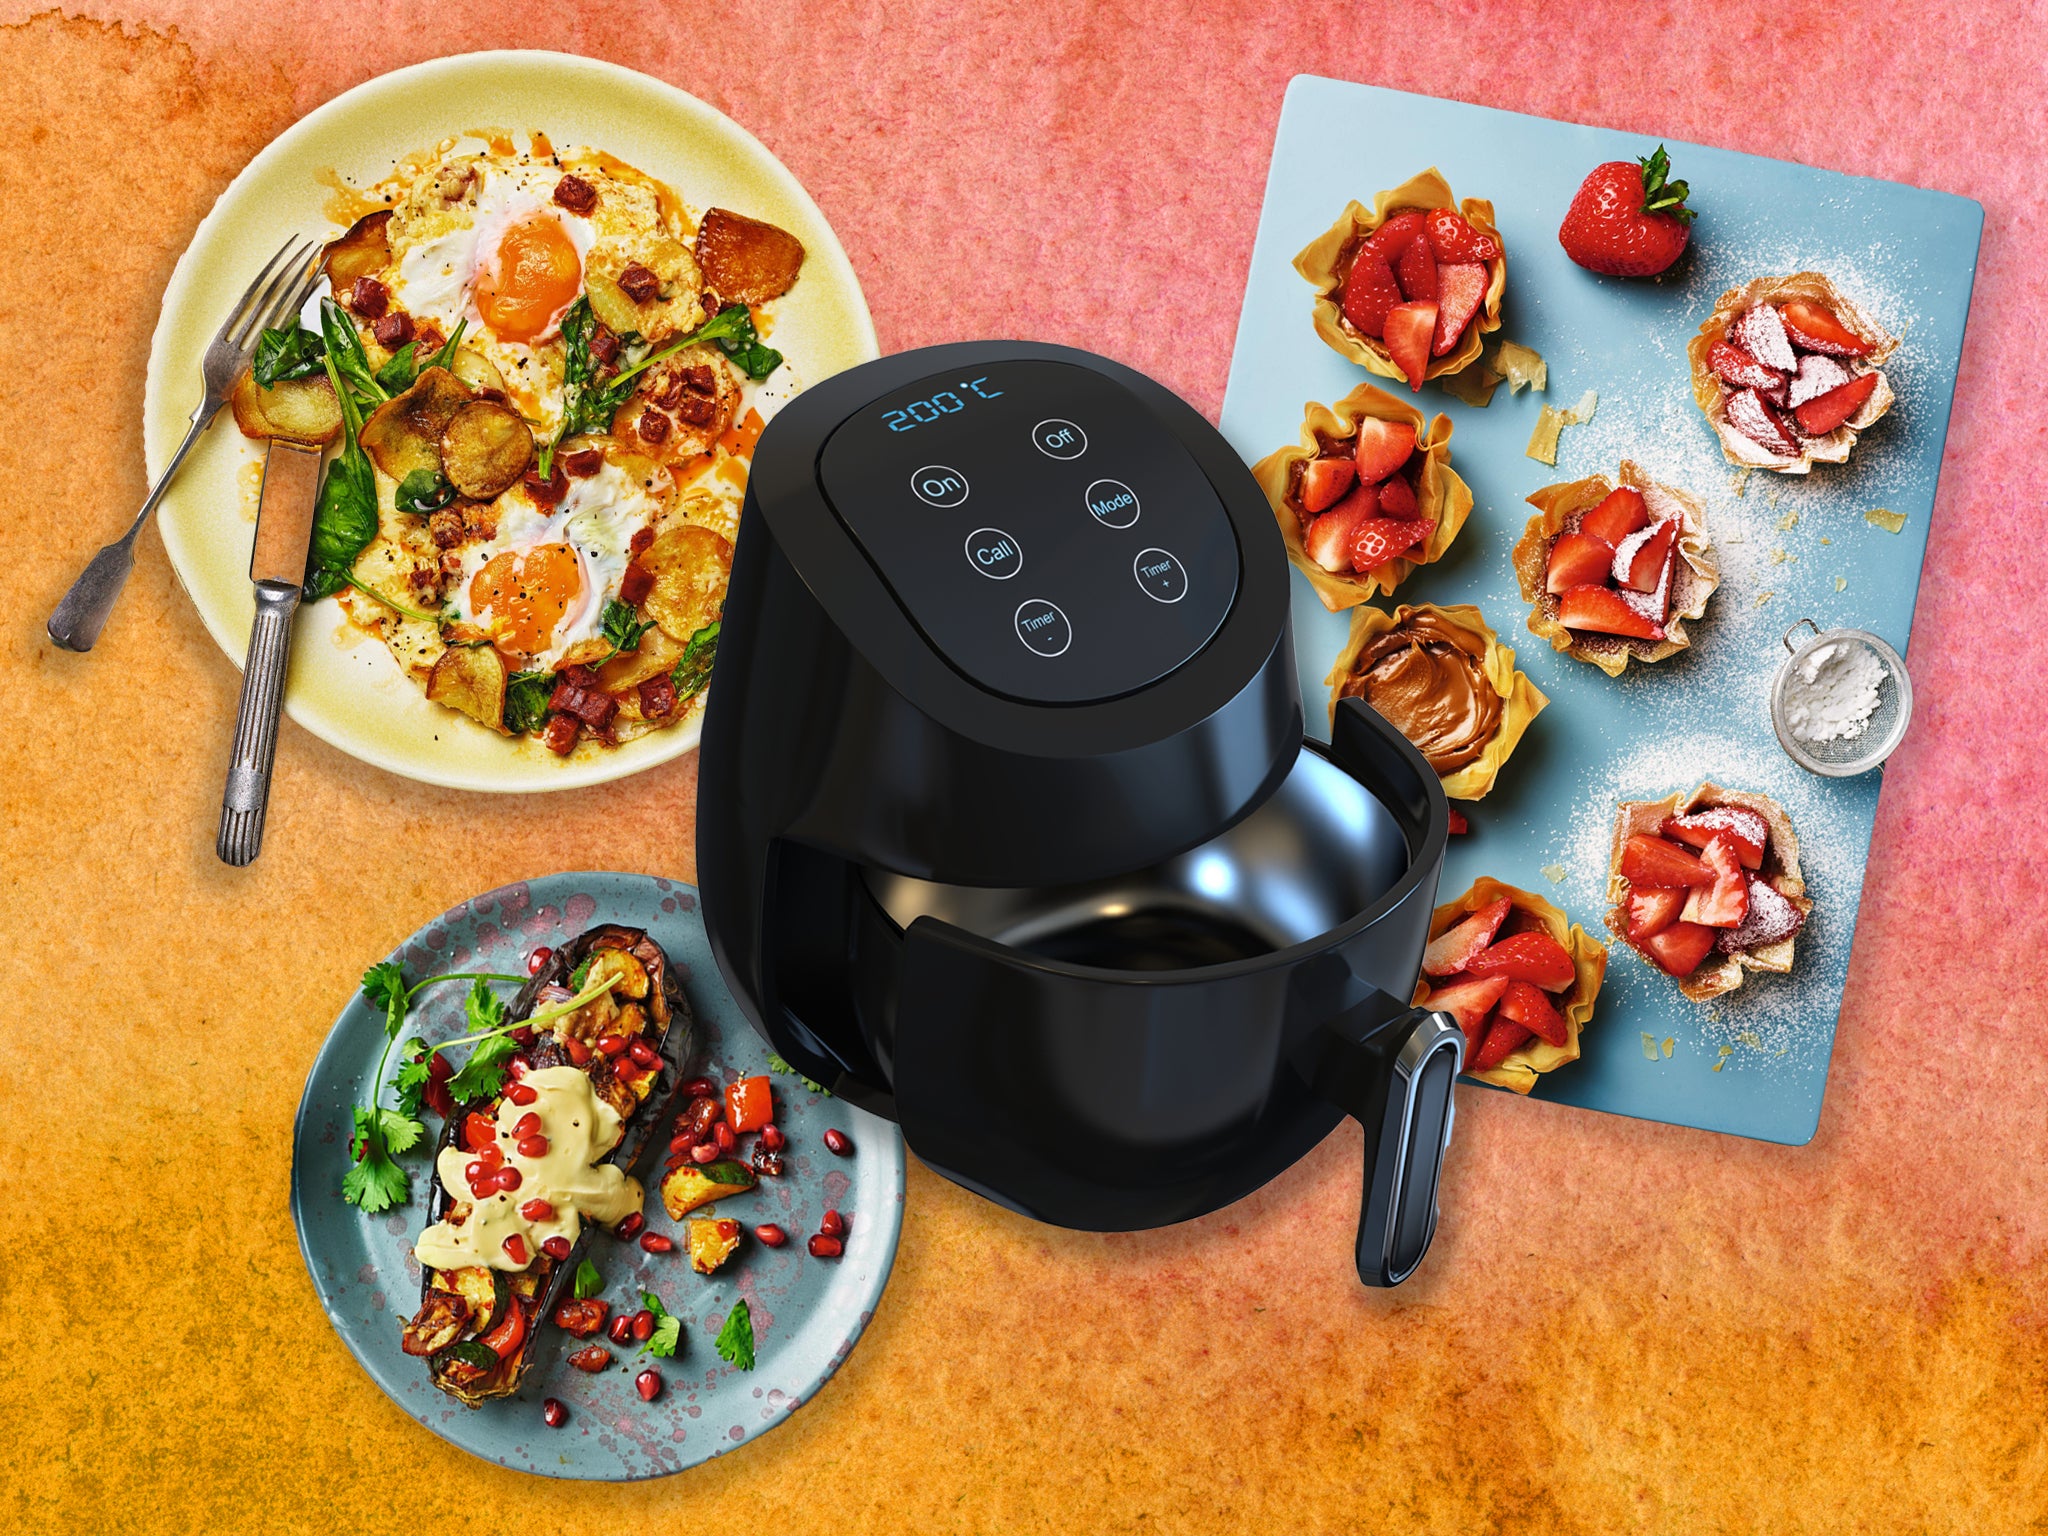 So you just got an air fryer? Here's how to bake with it.